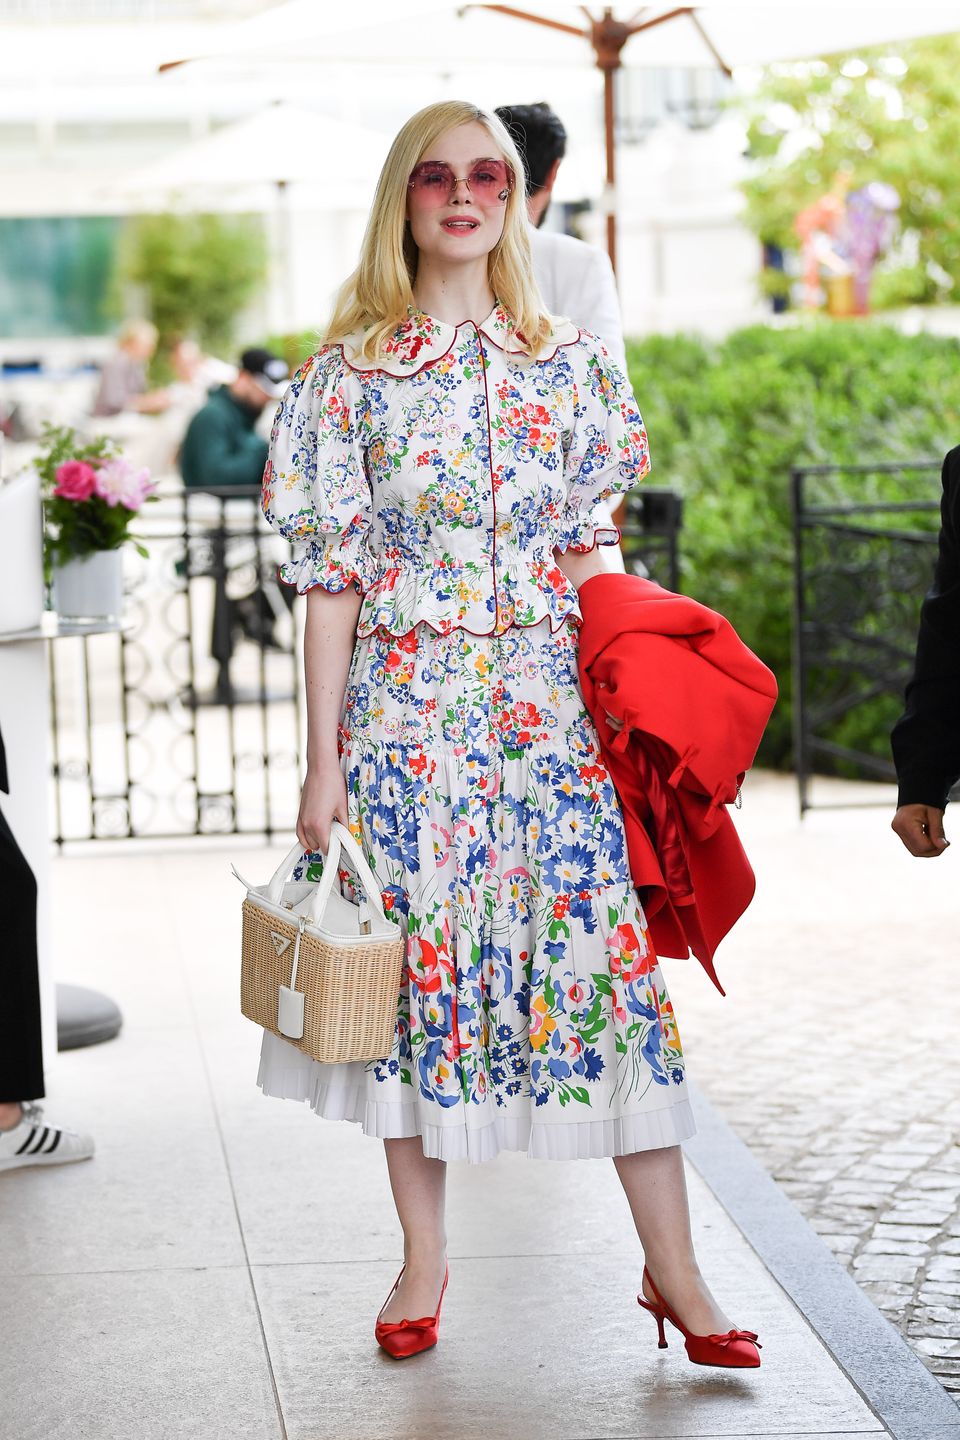 Elle Fanning Is Iconic Spring Fashion Personified